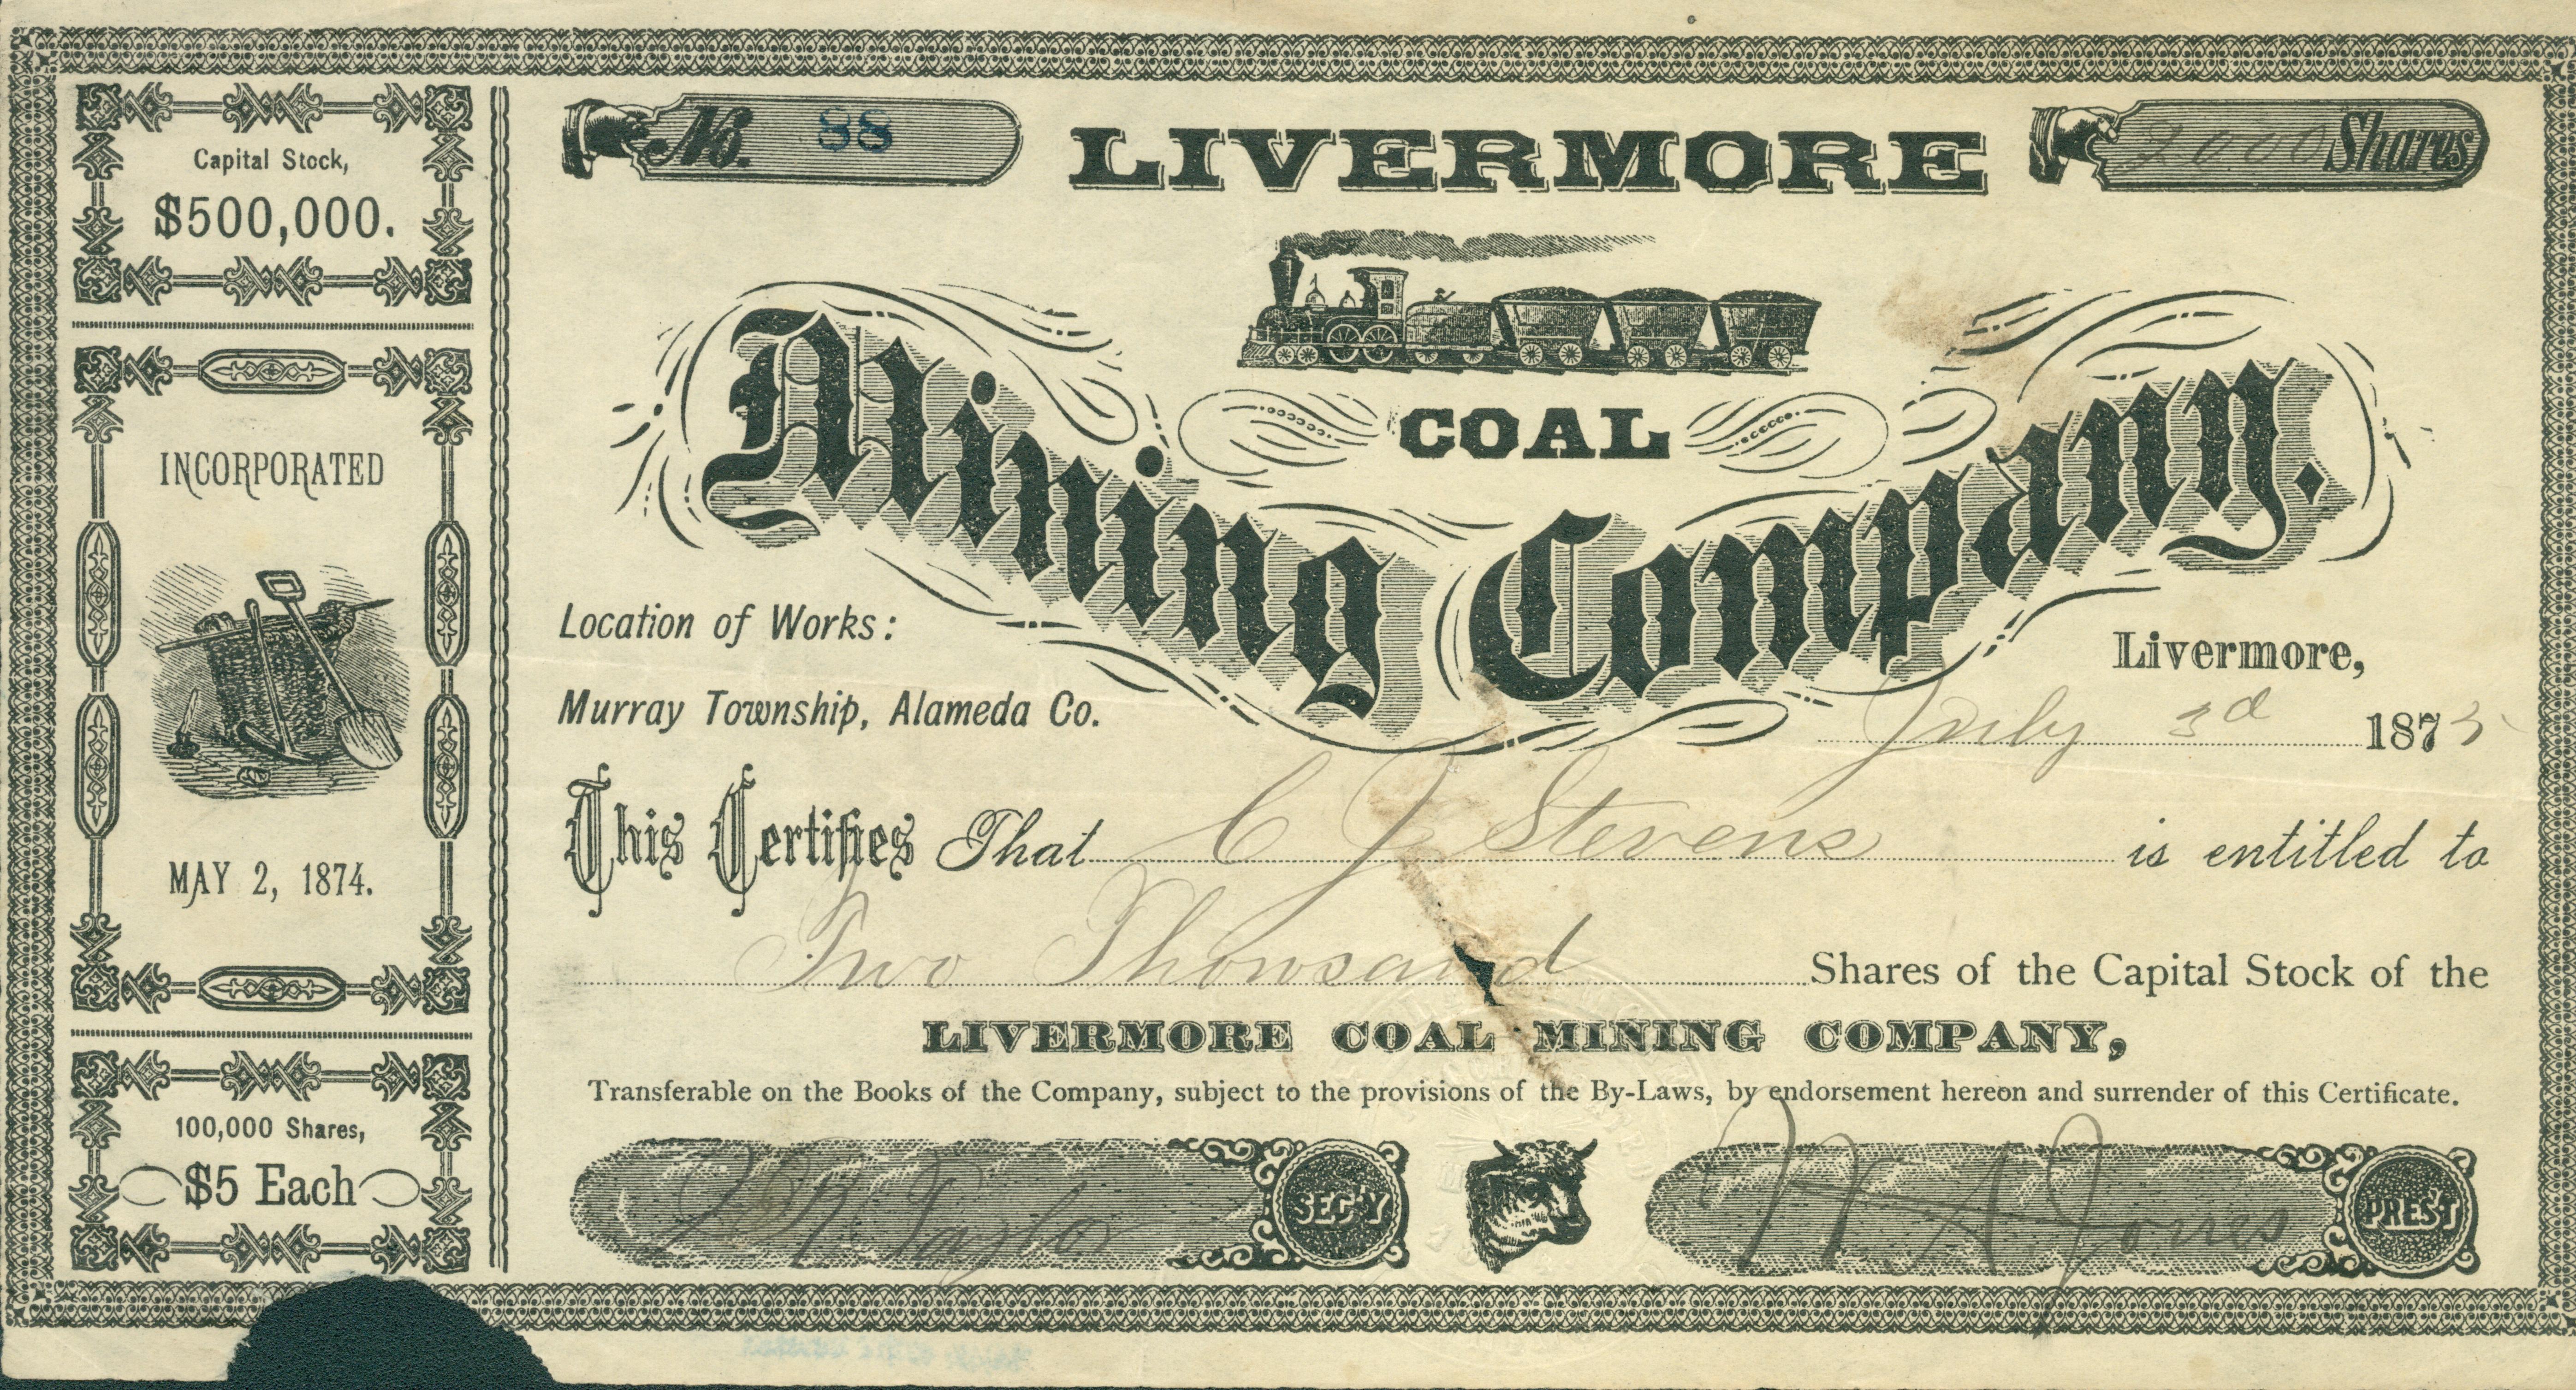 Certificate, No. 88 for 2000 shares for C. J. Stevens.  Includes print of locomotive pulling coal wagons.